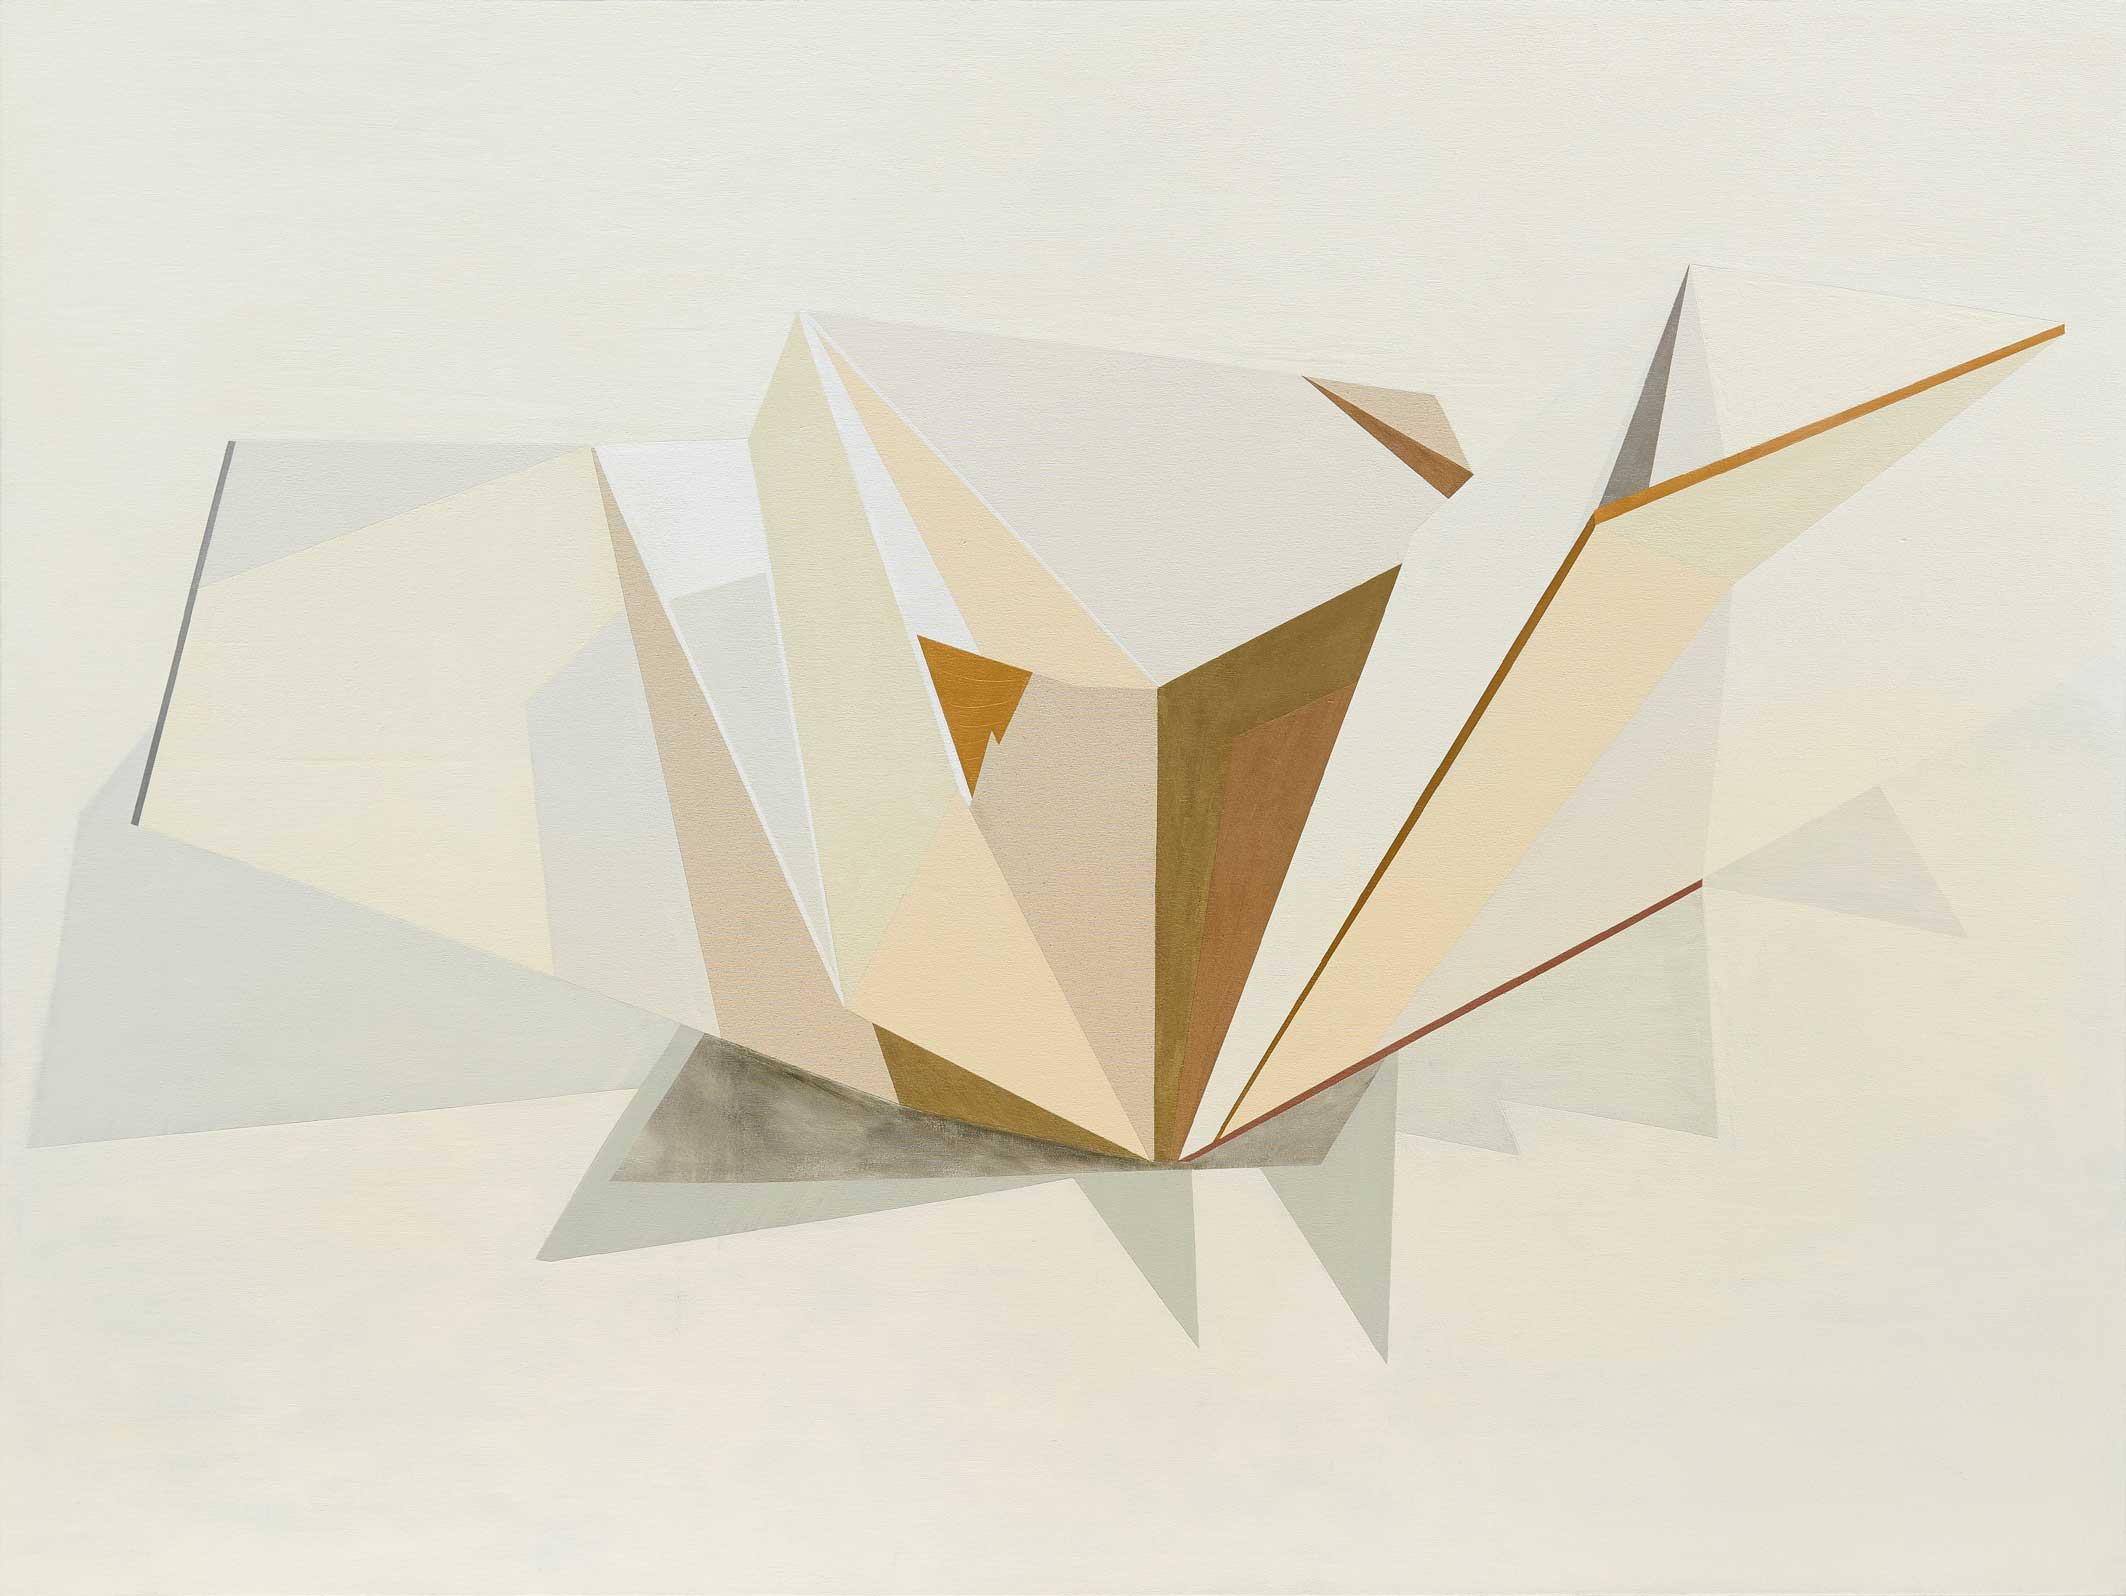  Andrea Eckersley, Untitiled (Gold), 2015. Oil on canvas, 200 x 150cm LR 